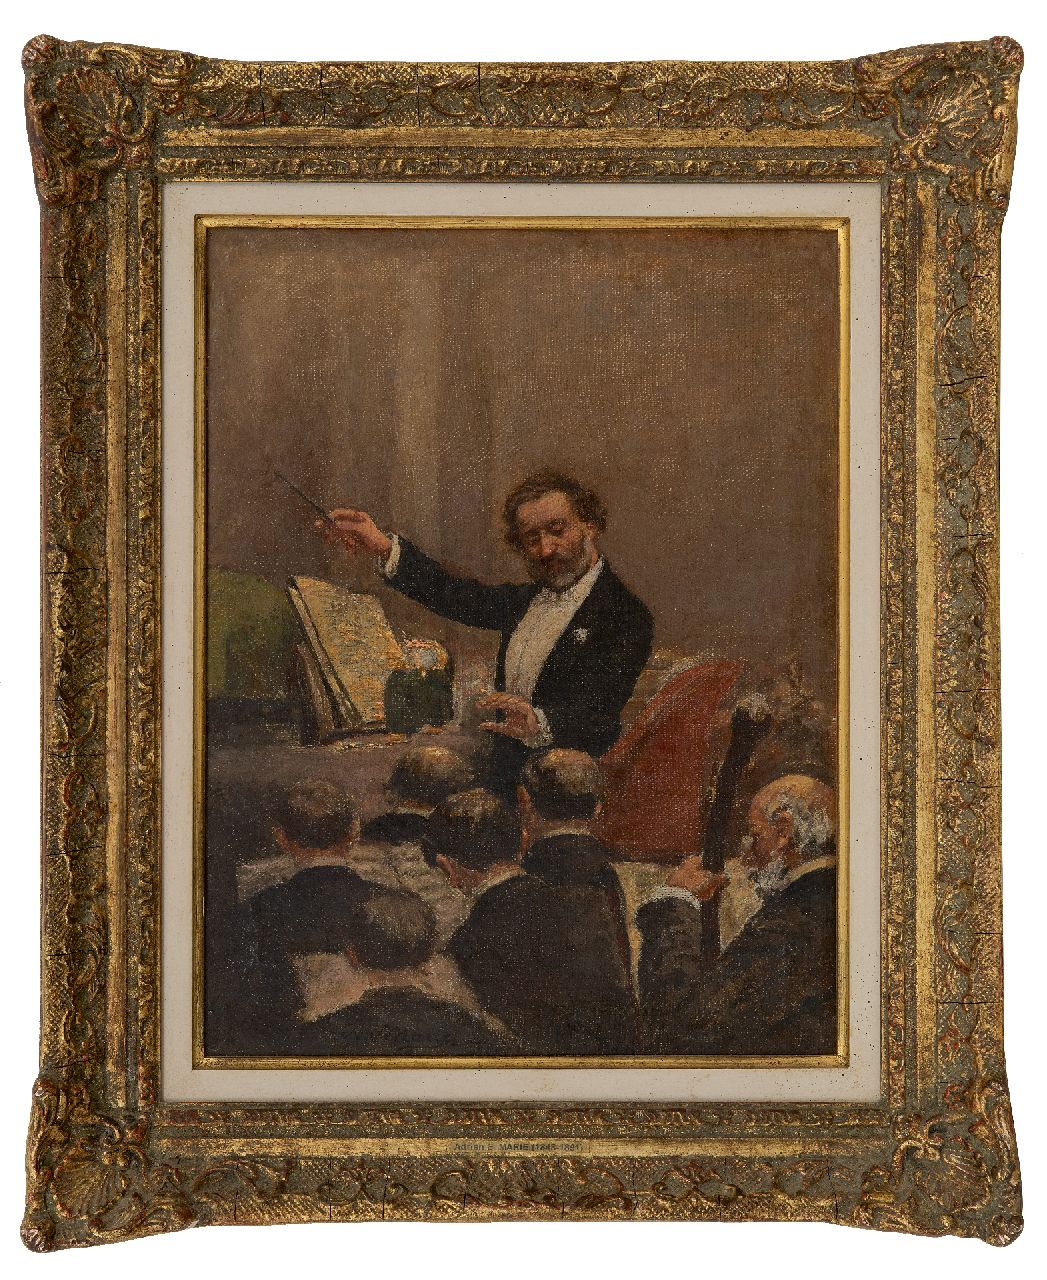 Marie A.E.  | Adrien Emmanuel Marie | Paintings offered for sale | Giuseppe Verdi conducts the opera orchestra at the first performance of Aïda in Paris, 1880, oil on canvas 29.8 x 22.5 cm, signed c.l. and executed 1880